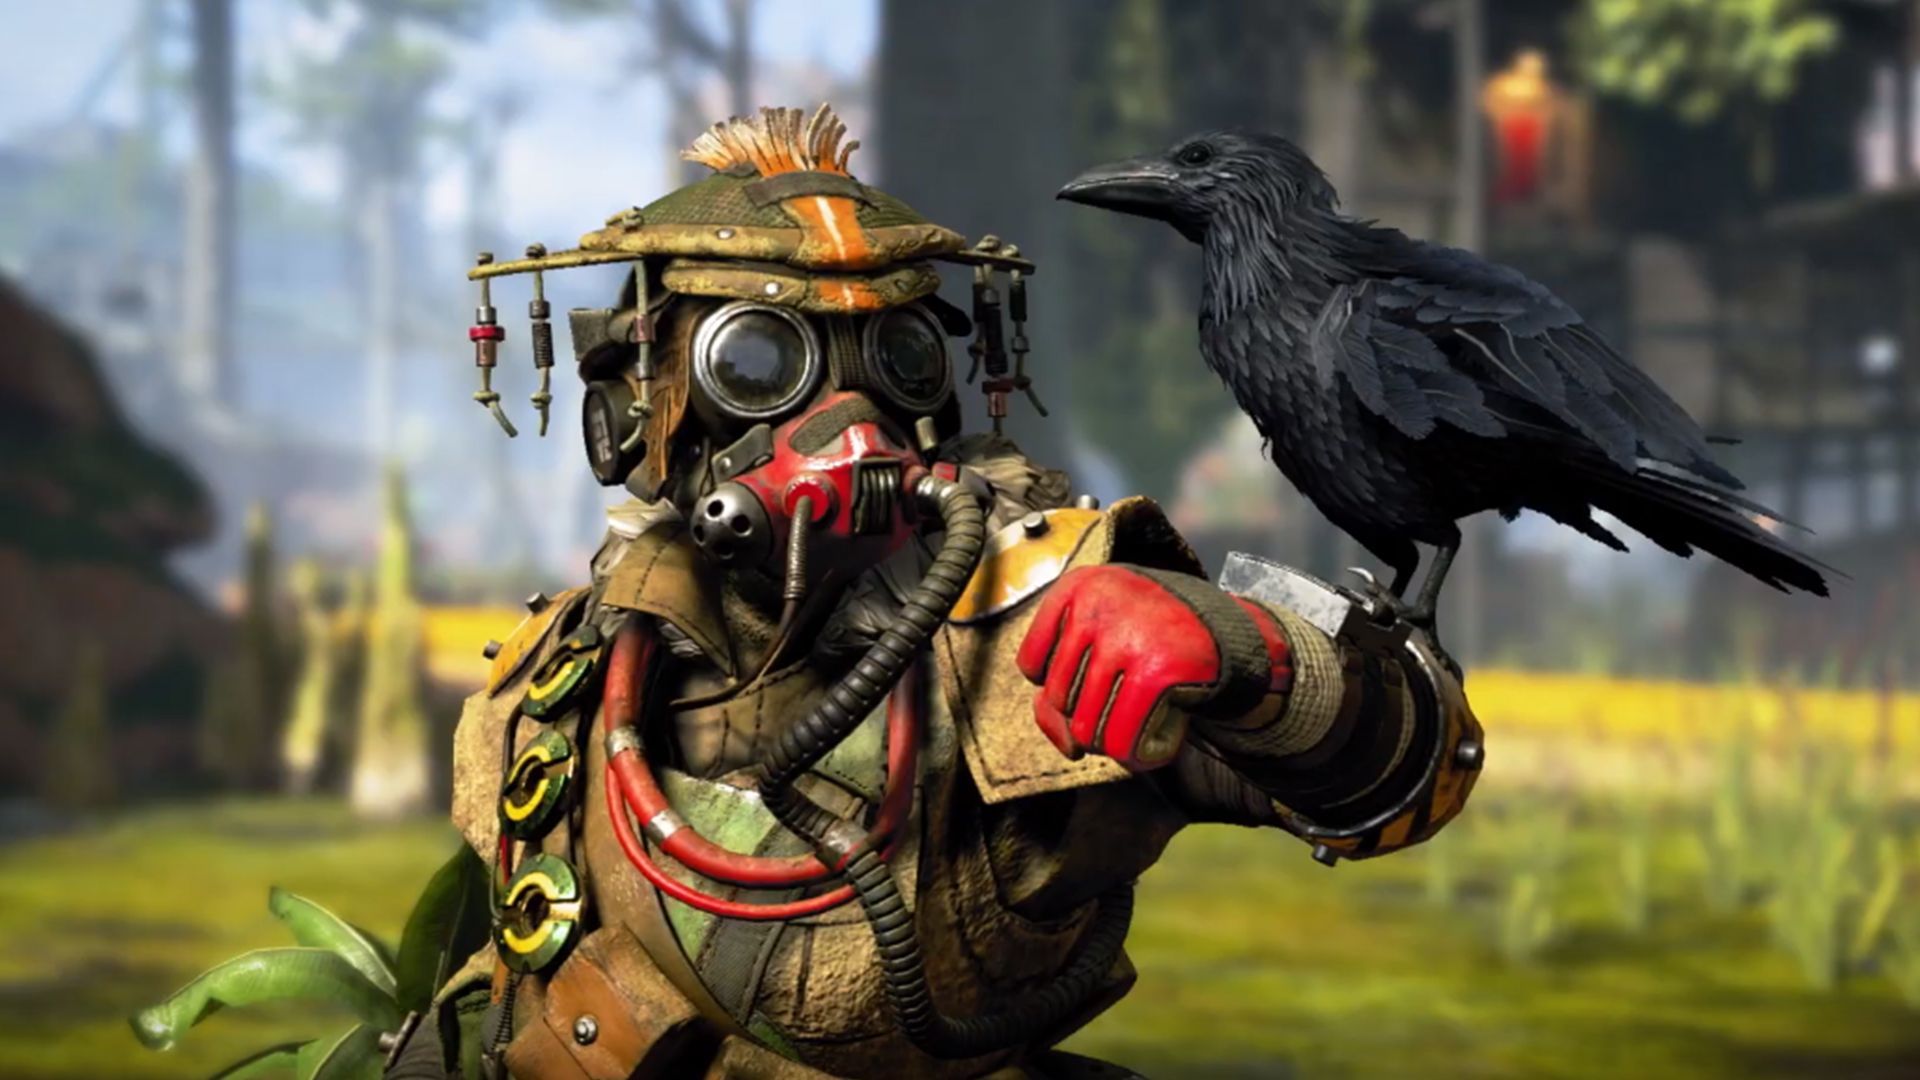 Leaked Apex Legends trailer shows new Bloodhound heirloom weapon